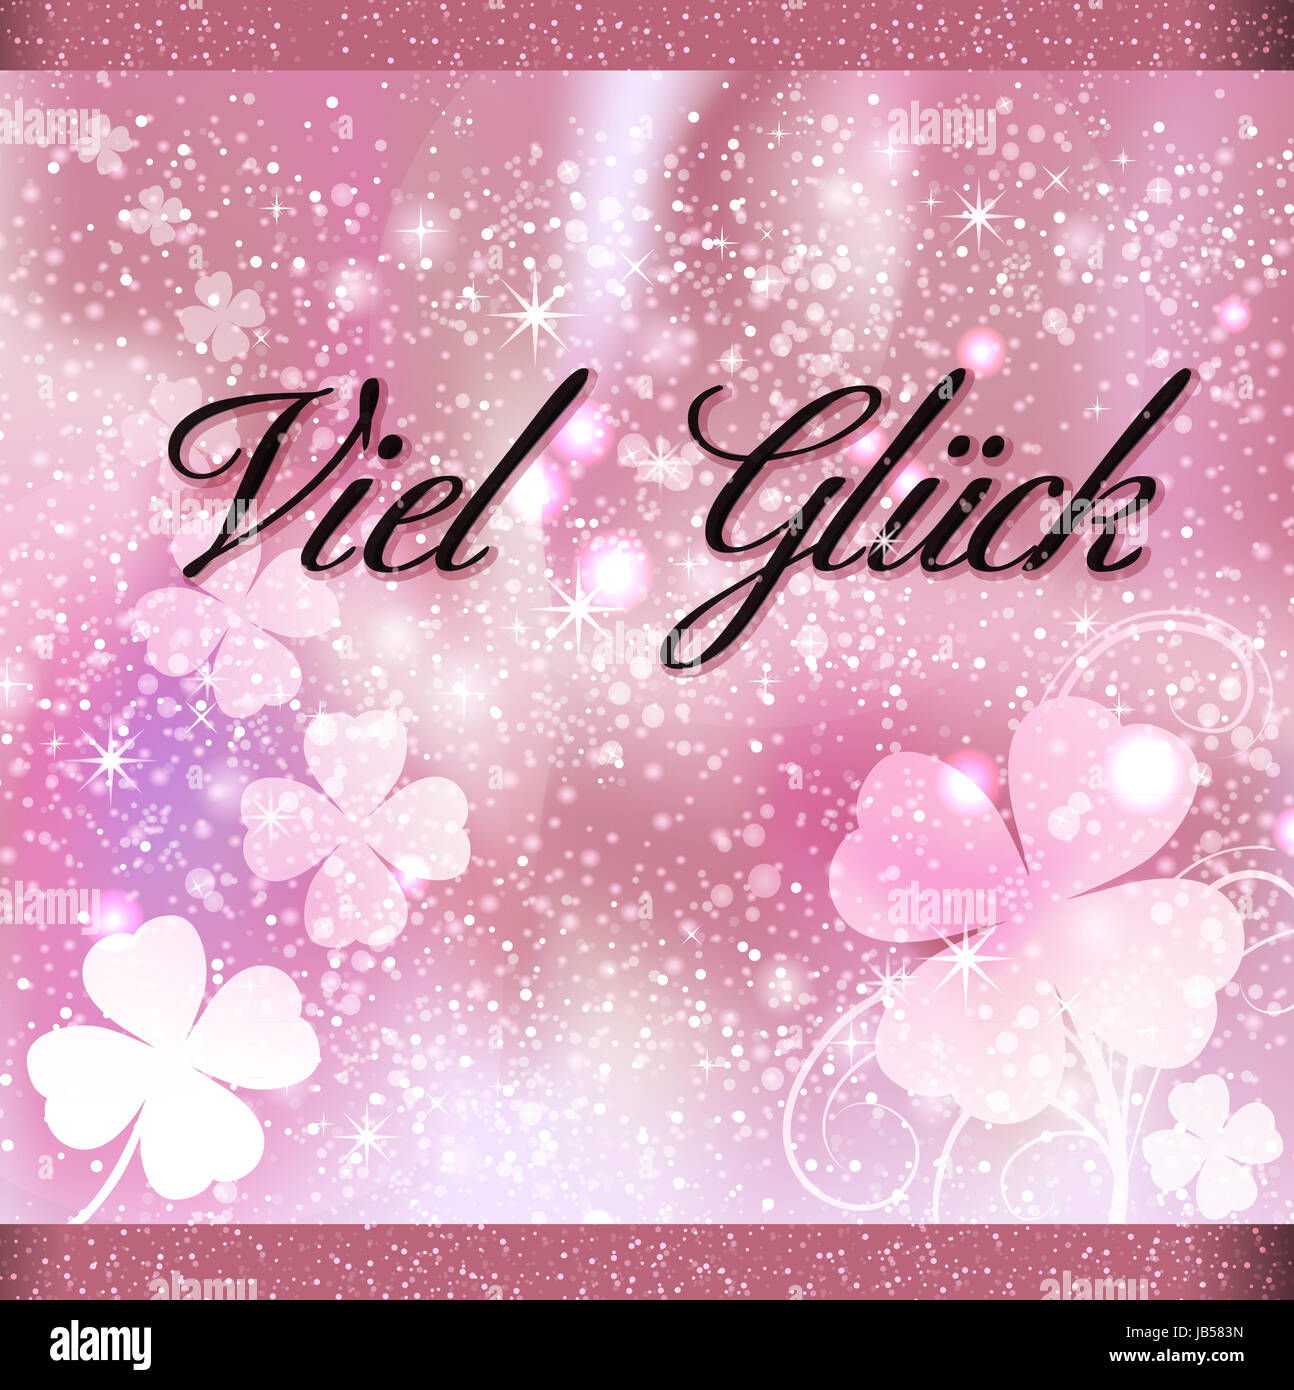 Viel Gluck Wunschen High Resolution Stock Photography And Images Alamy